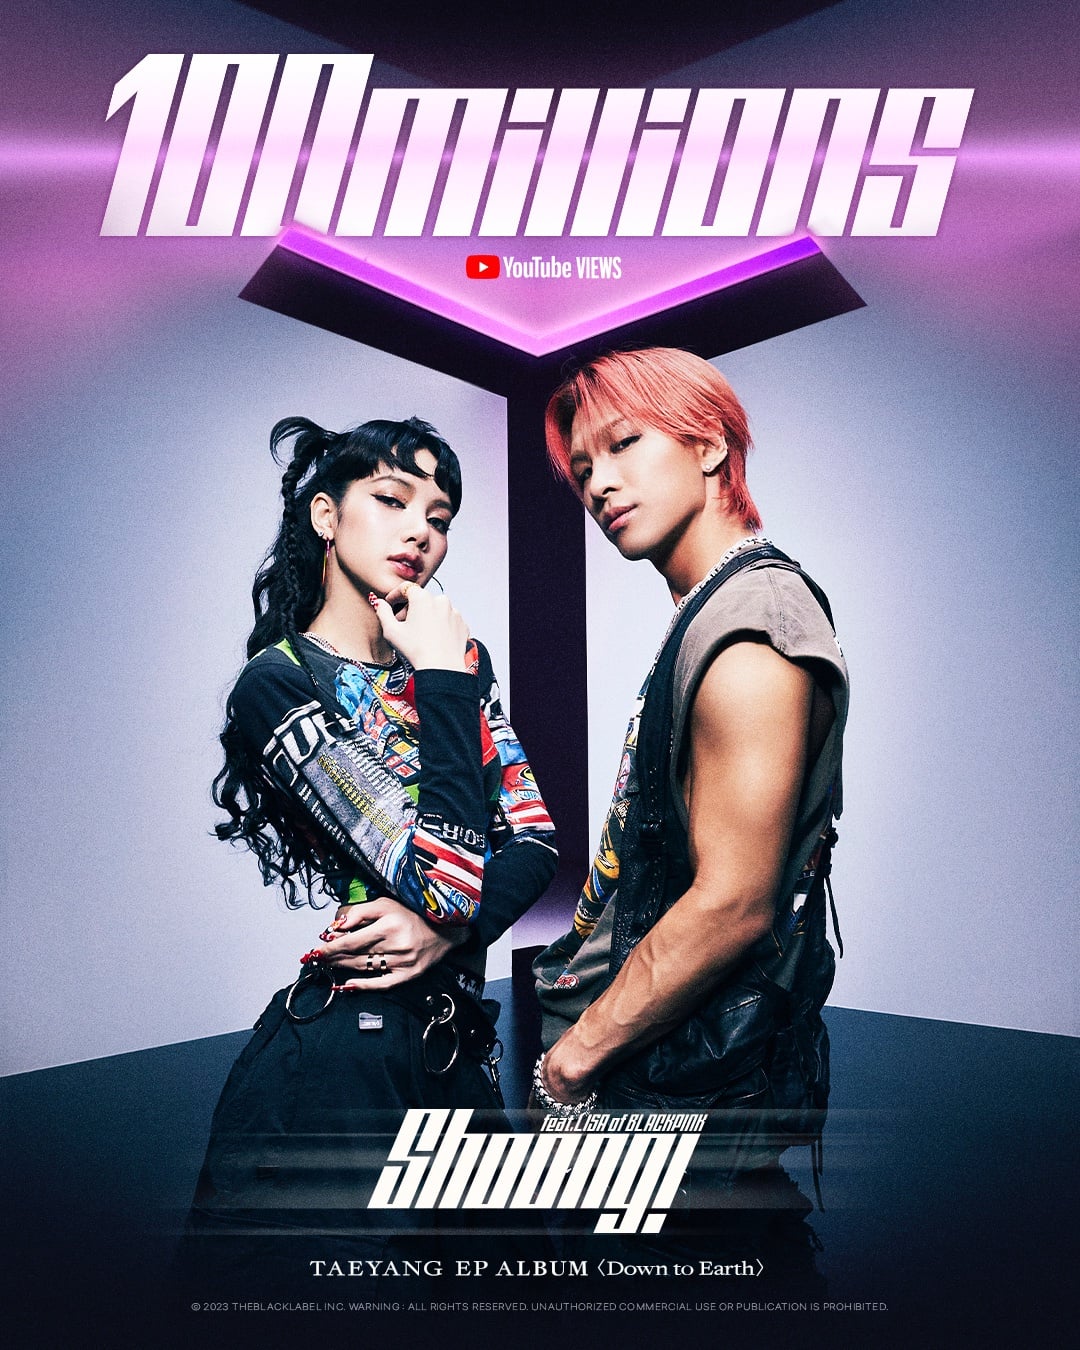 230829 Taeyang - ‘Shoong! (feat. LISA of BLACKPINK) PERFORMANCE VIDEO hits 100 MILLION VIEWS on Youtube! [Official Poster]